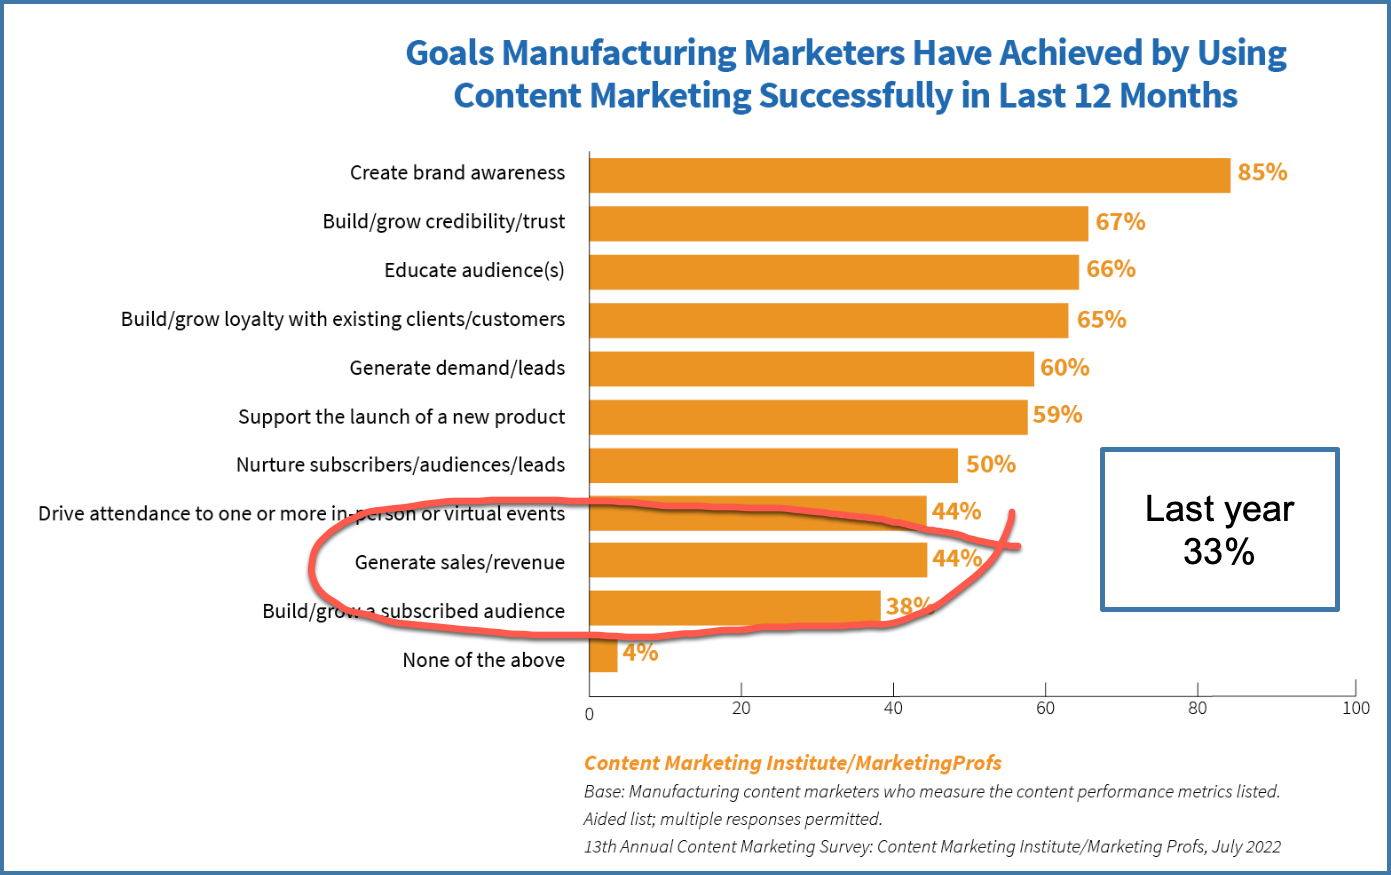 More manufacturers are waking up to the value of content marketing